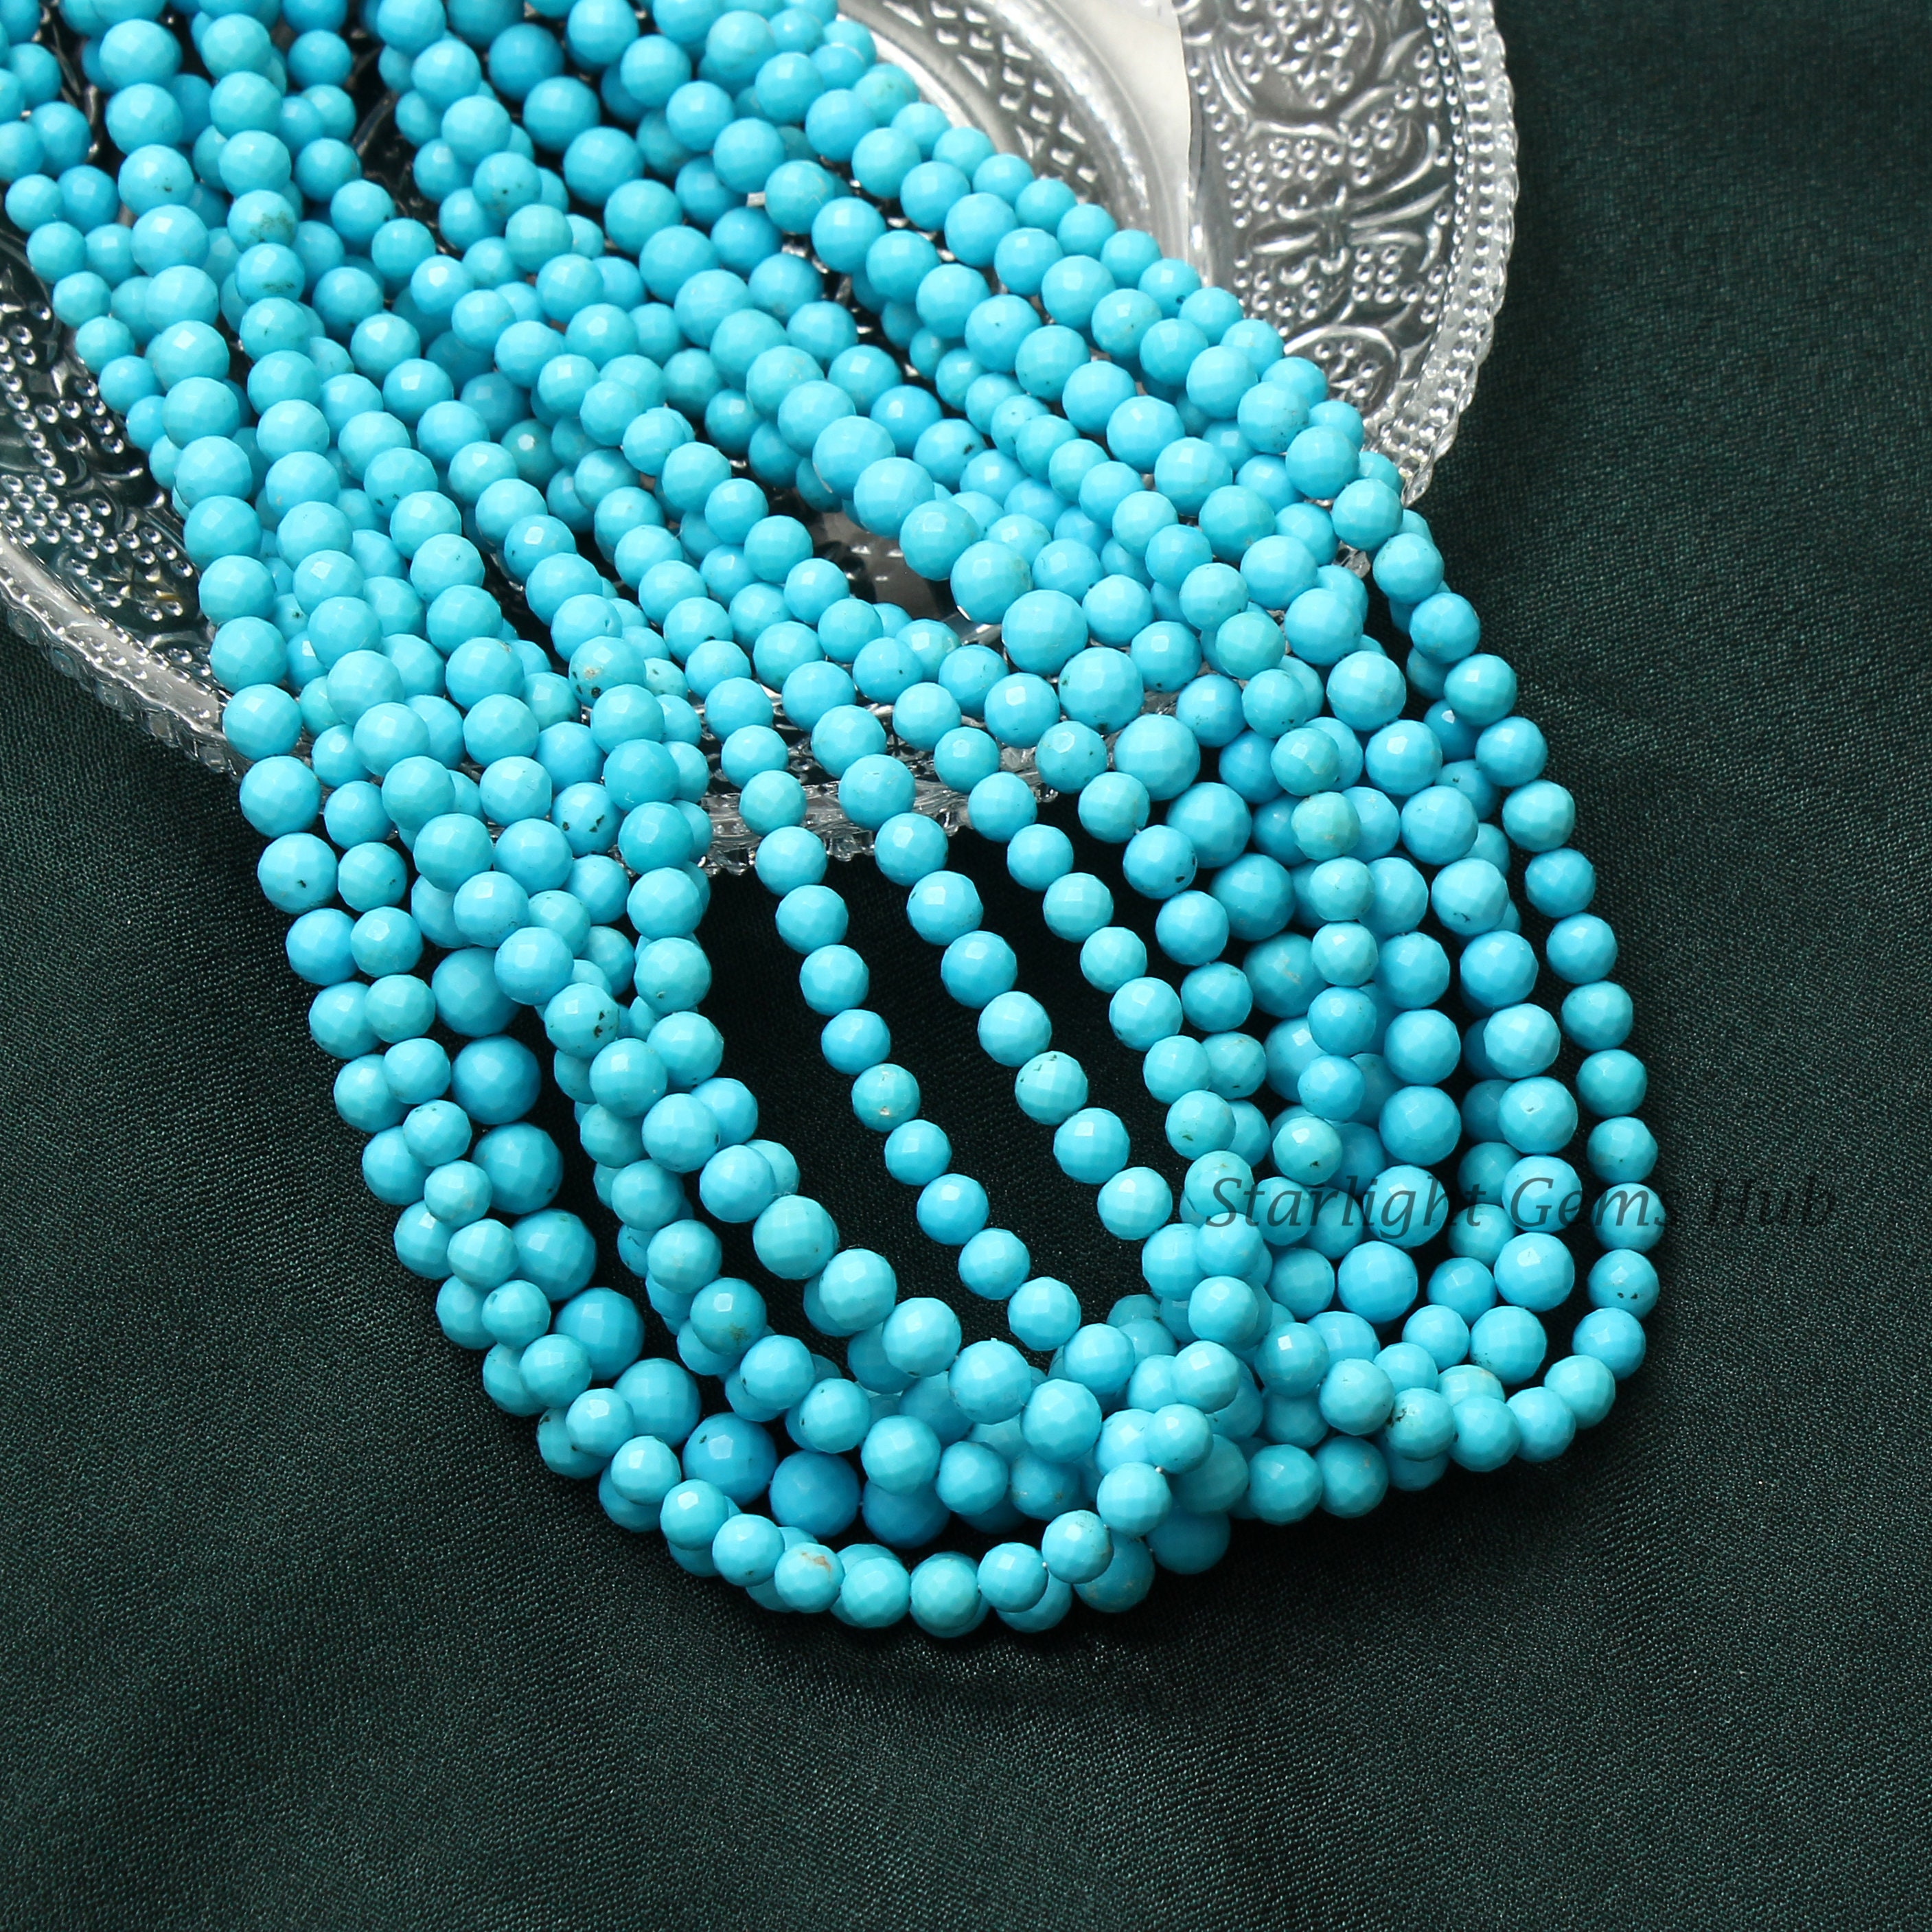 BEADIA Natural Blue Turquoise Spacer Beads Caps Loose Semi